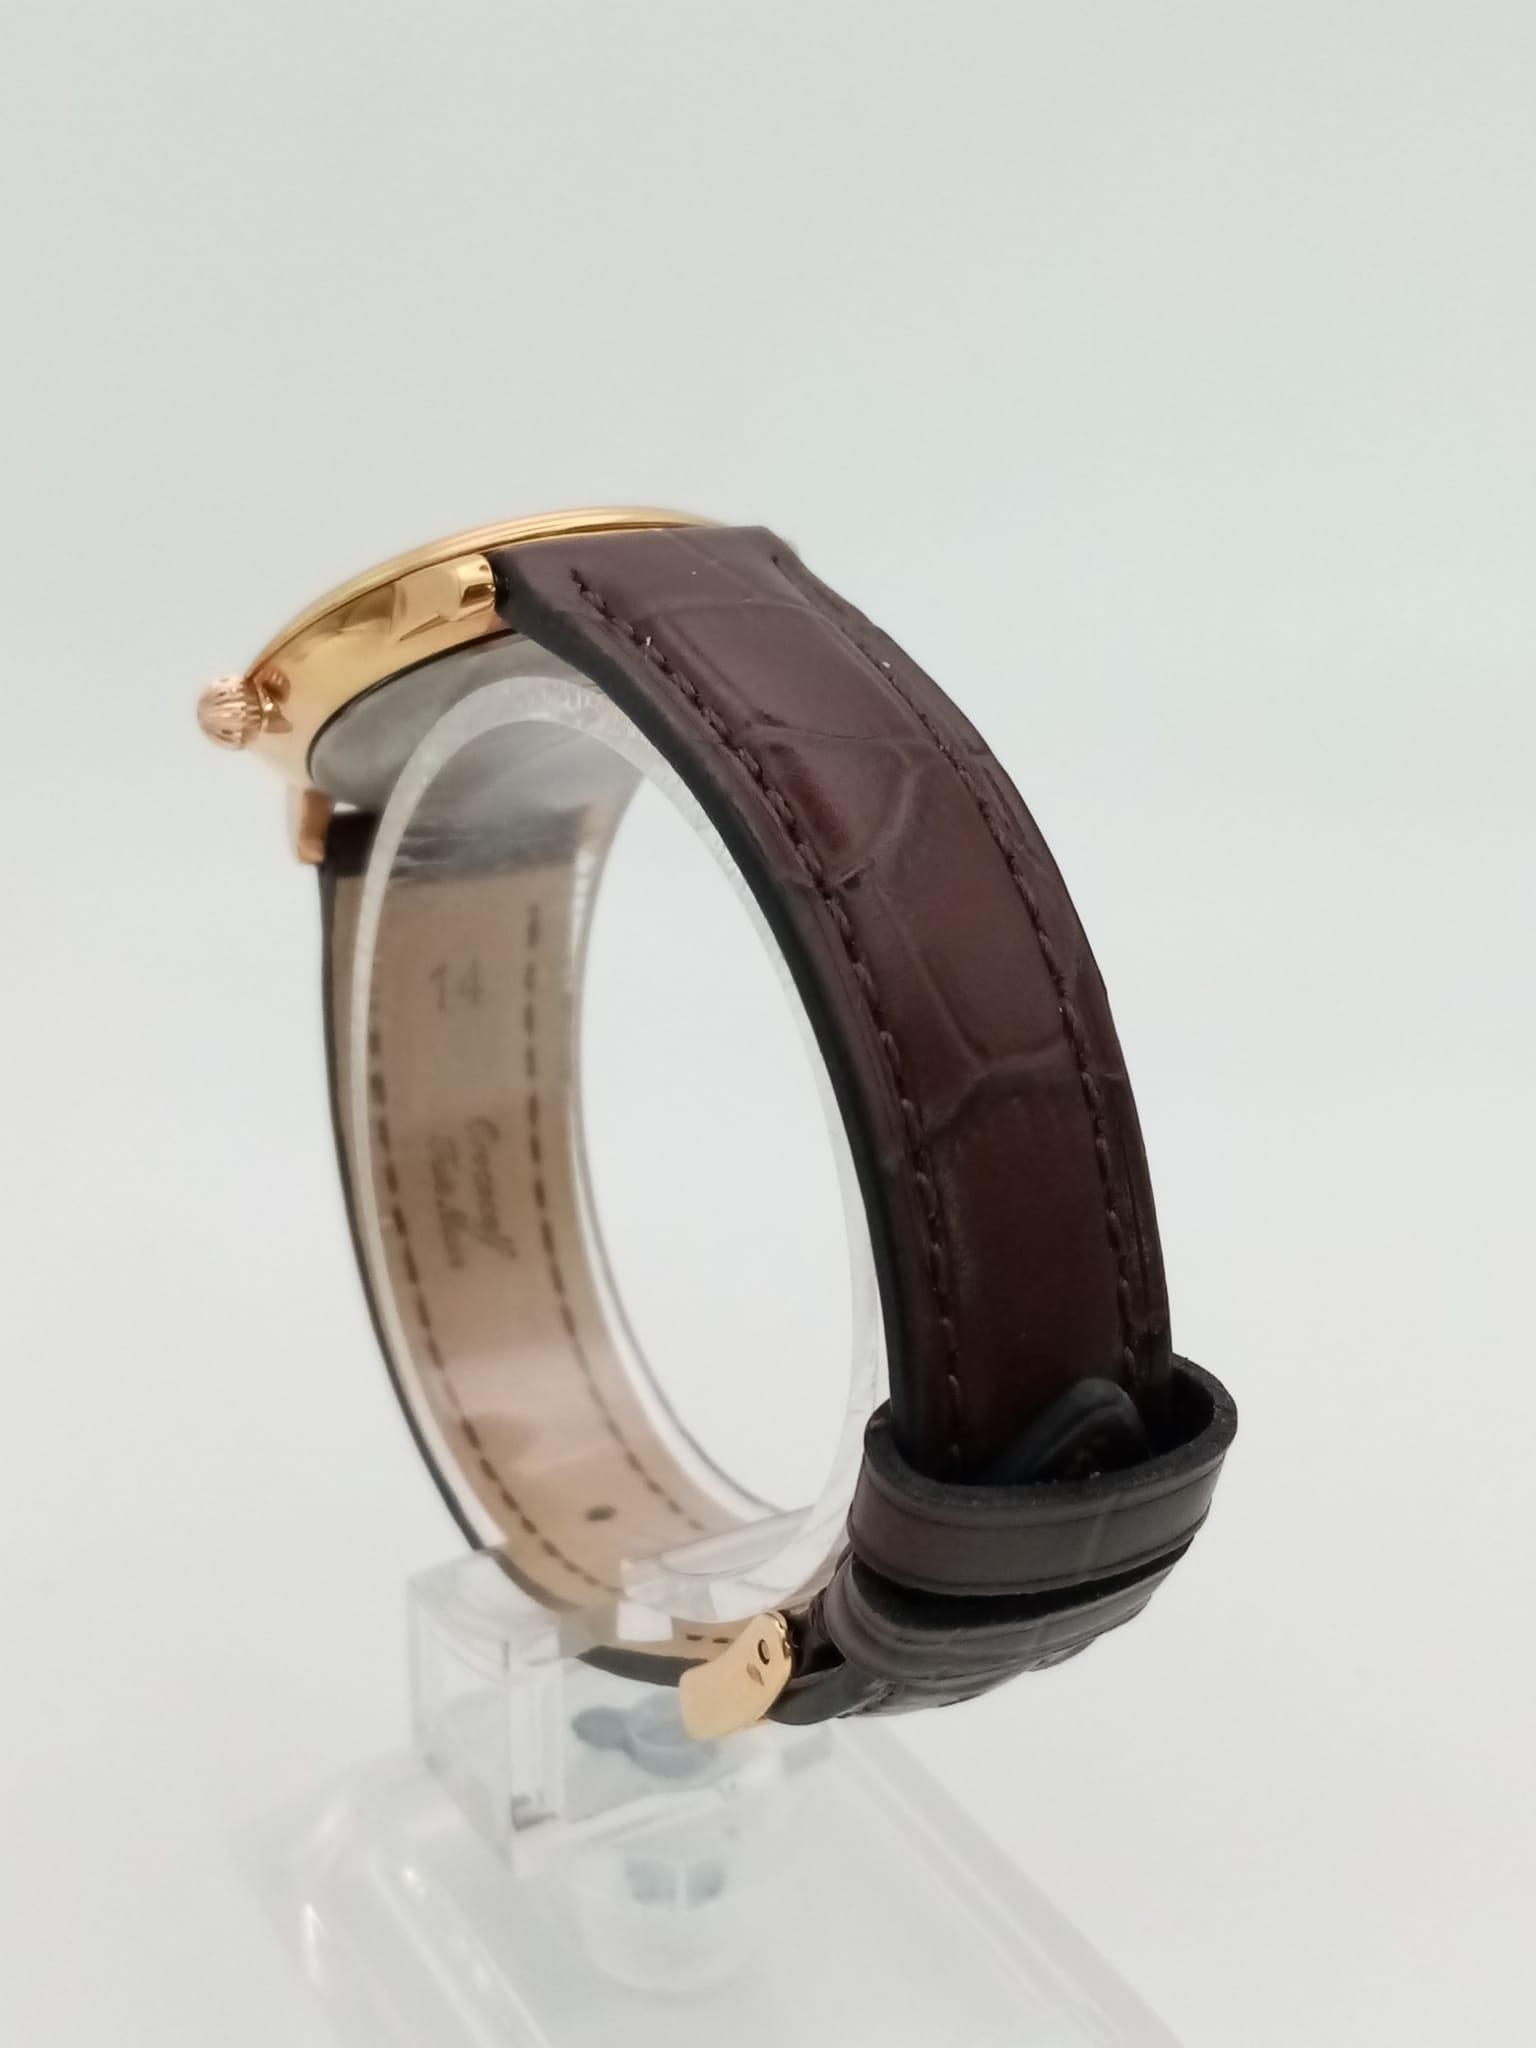 A Frederique Constant Ladies Slimline Watch. Brown leather strap. Gold plated case - 28mm. White - Image 4 of 4